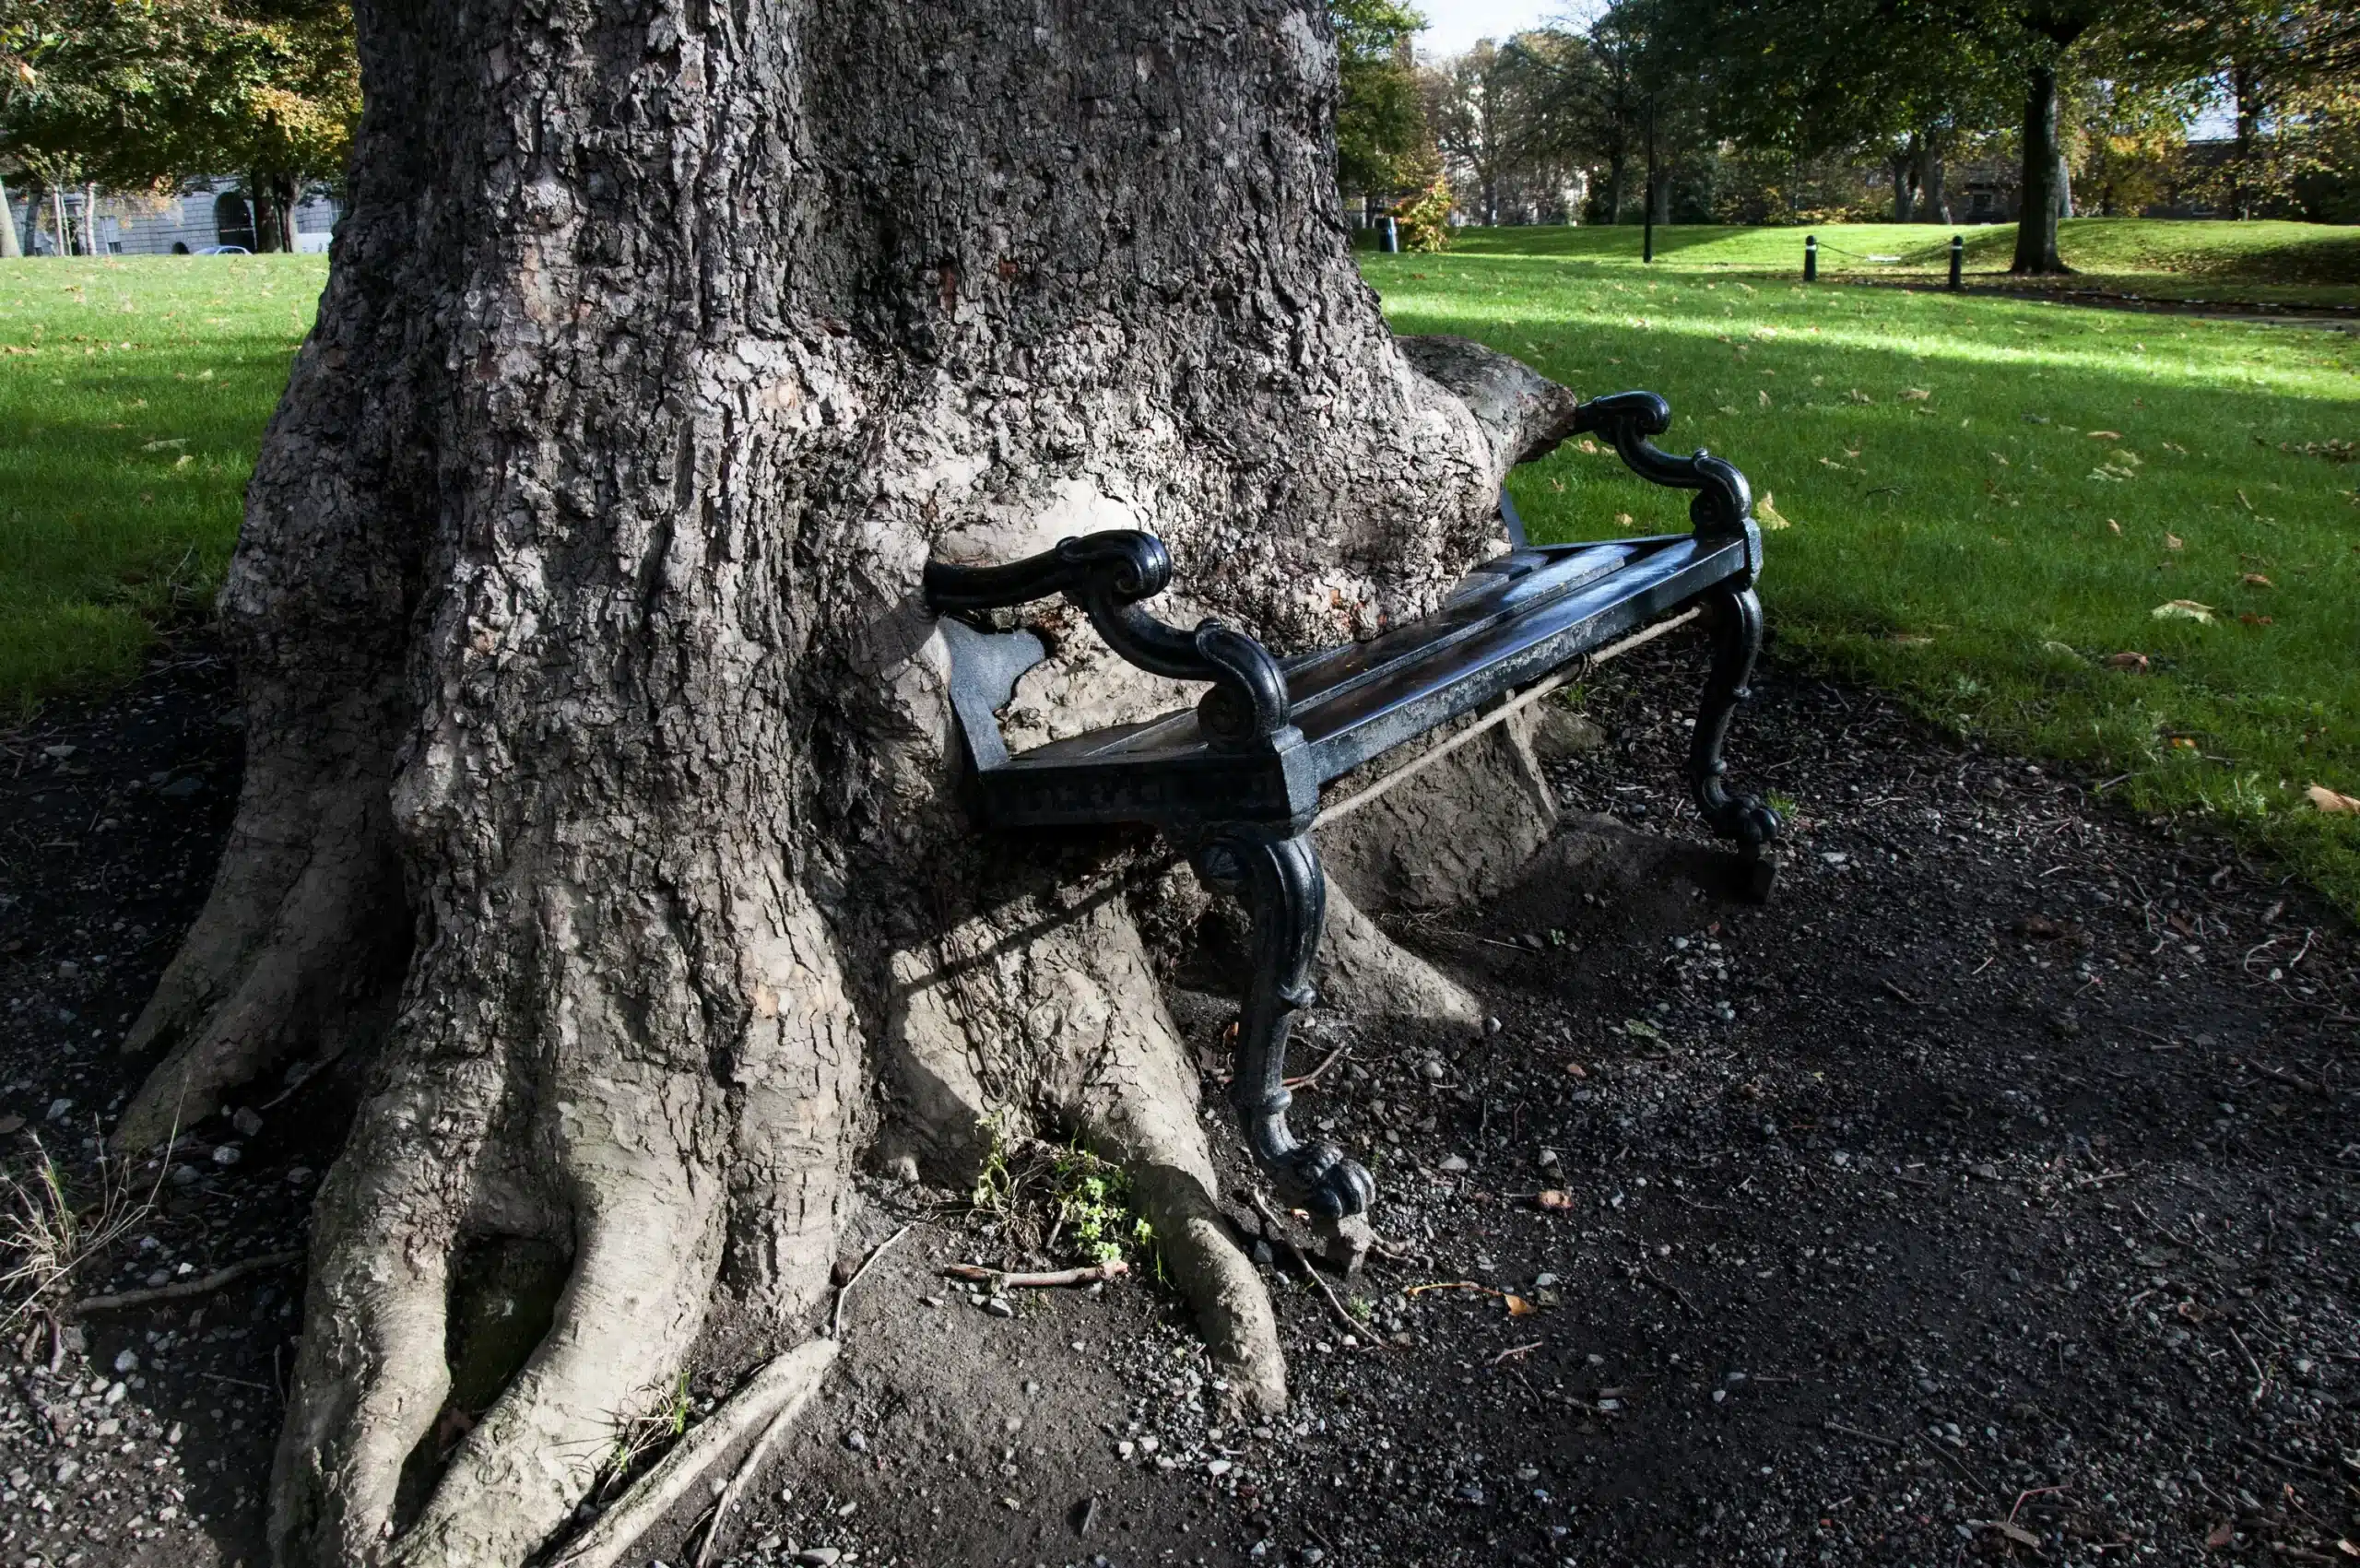 The tale of the Dublin's famous Hungry Tree